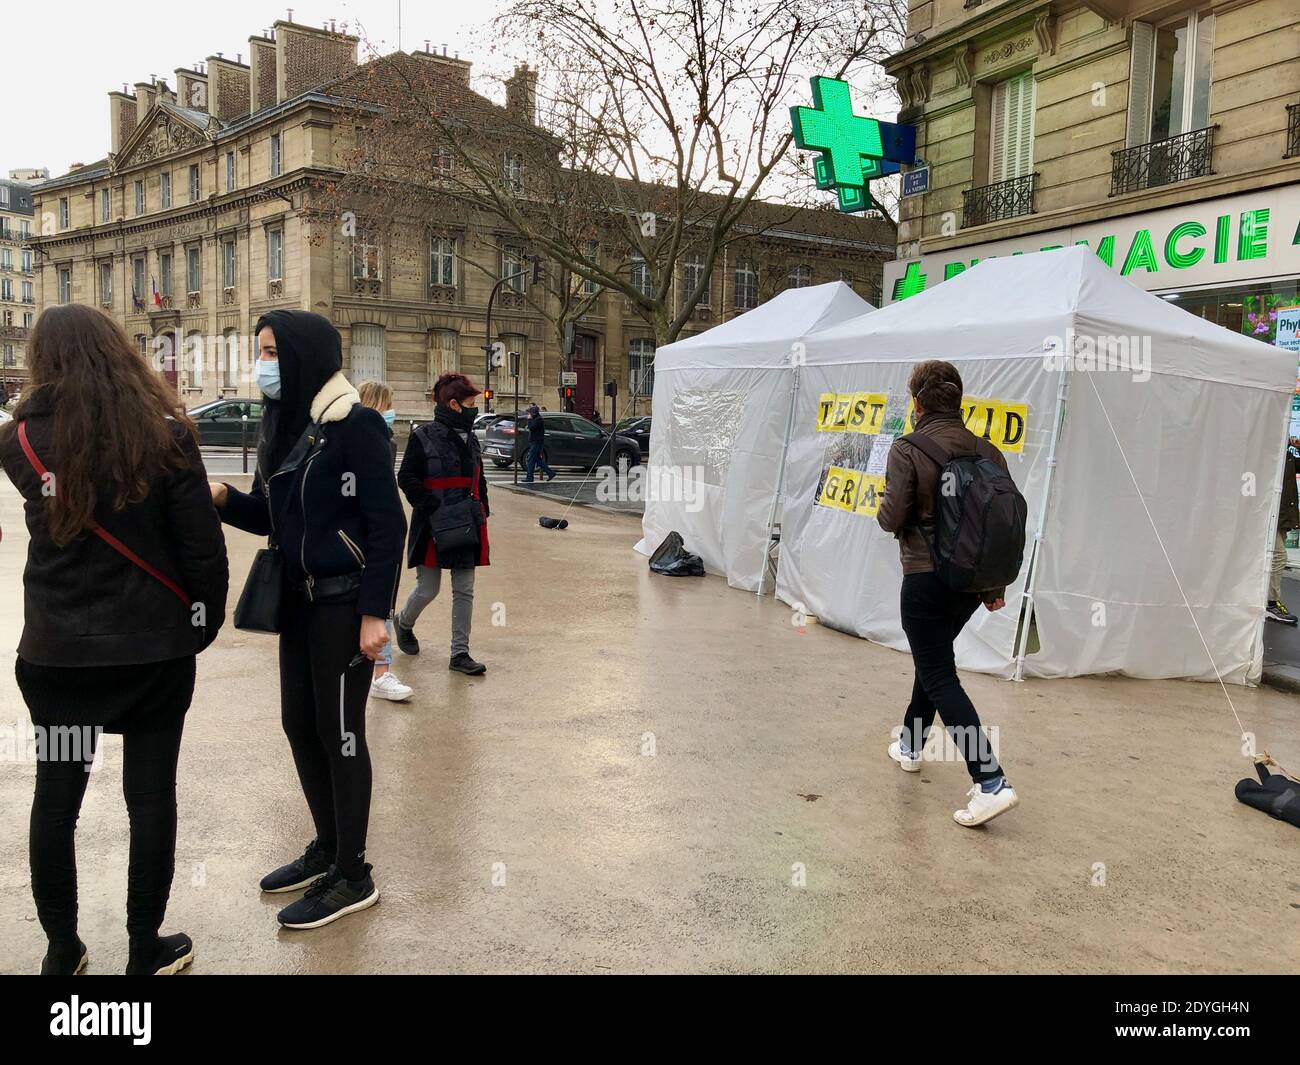 Paris, France, Group People Standing near Covid-19 Testing Tent on Street, French Pharmacy giving Free Covdi Testing, Masked public Stock Photo